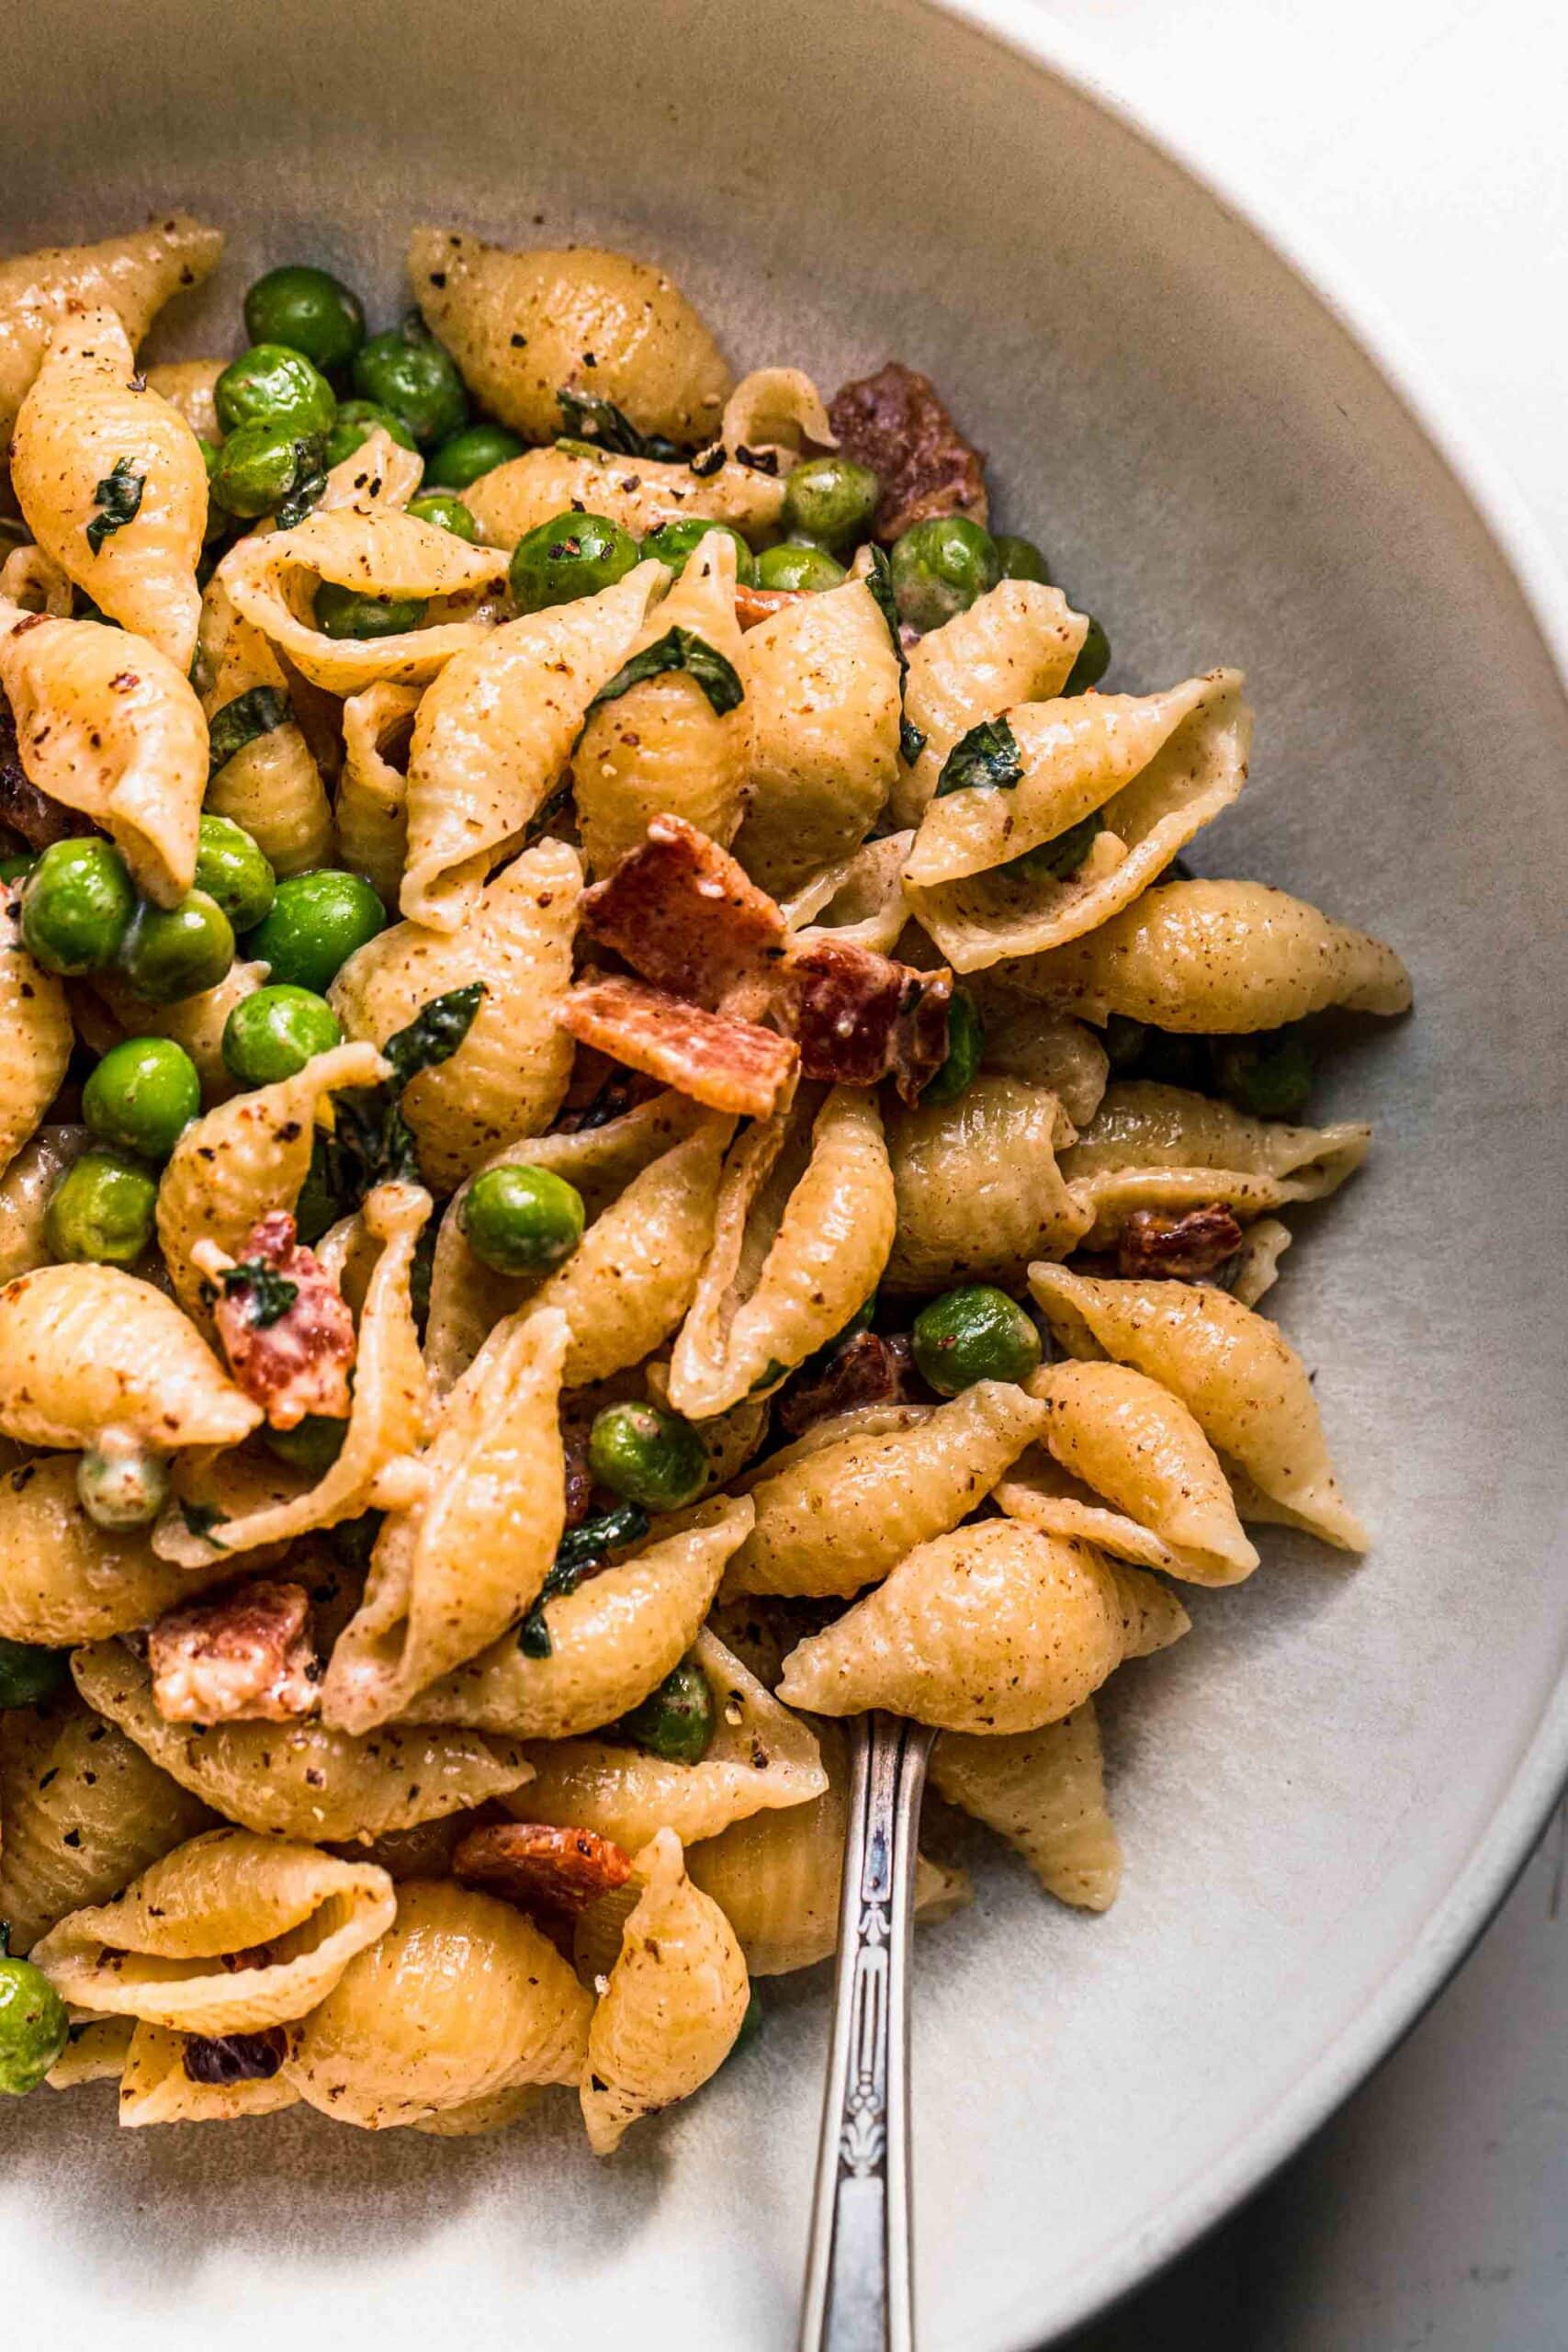 Pasta with peas and bacon in white bowl with fork.